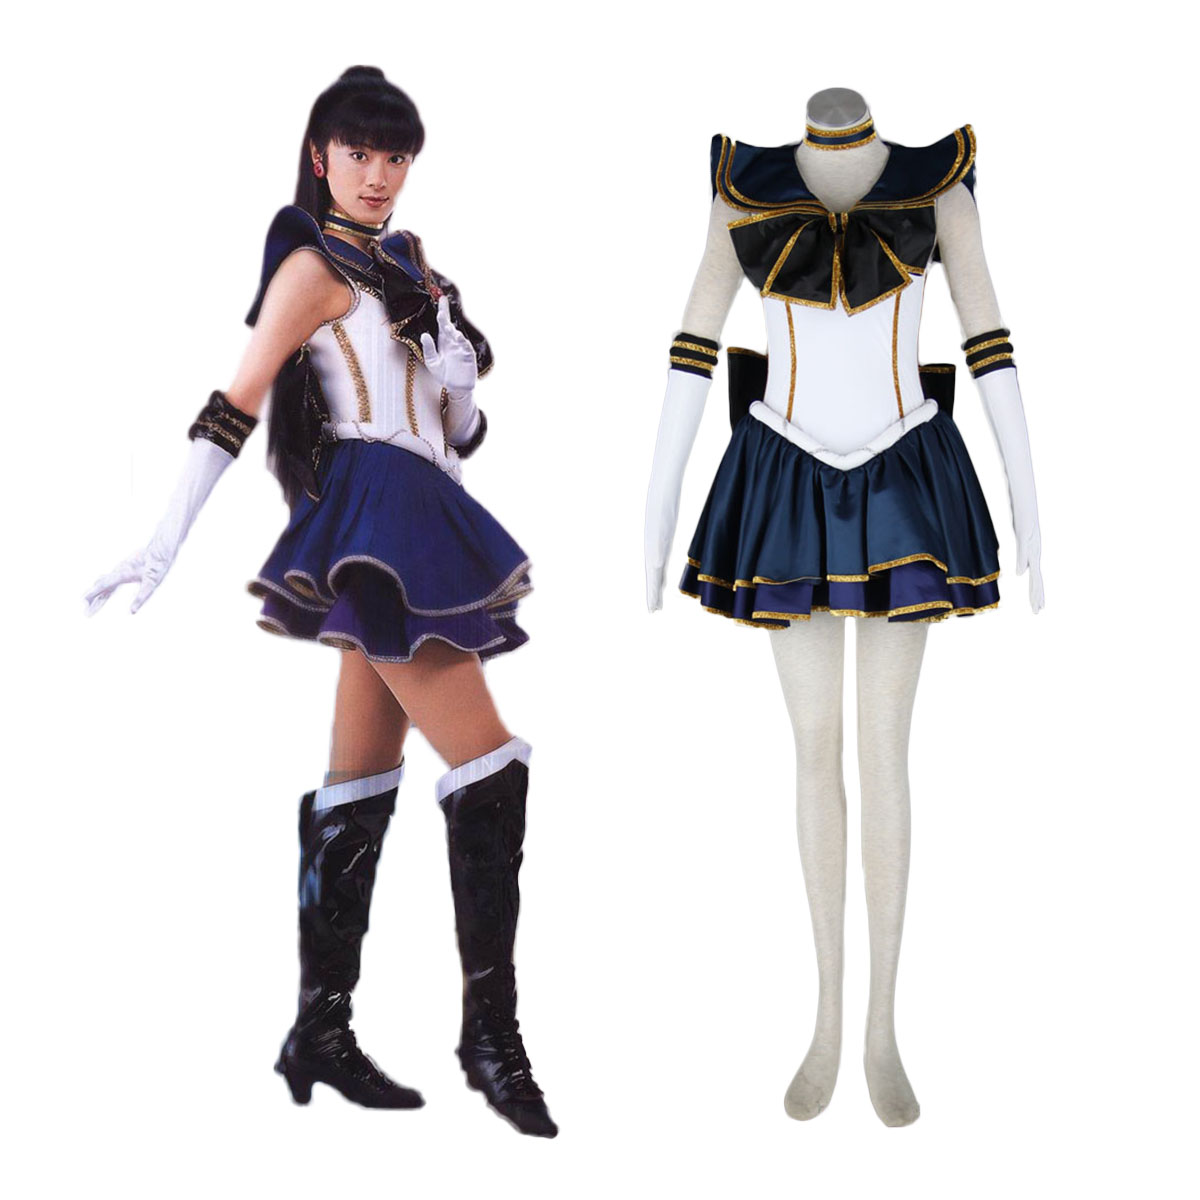 Sailor Moon Meiou Setsuna 2ND Cosplay Costumes Deluxe Edition